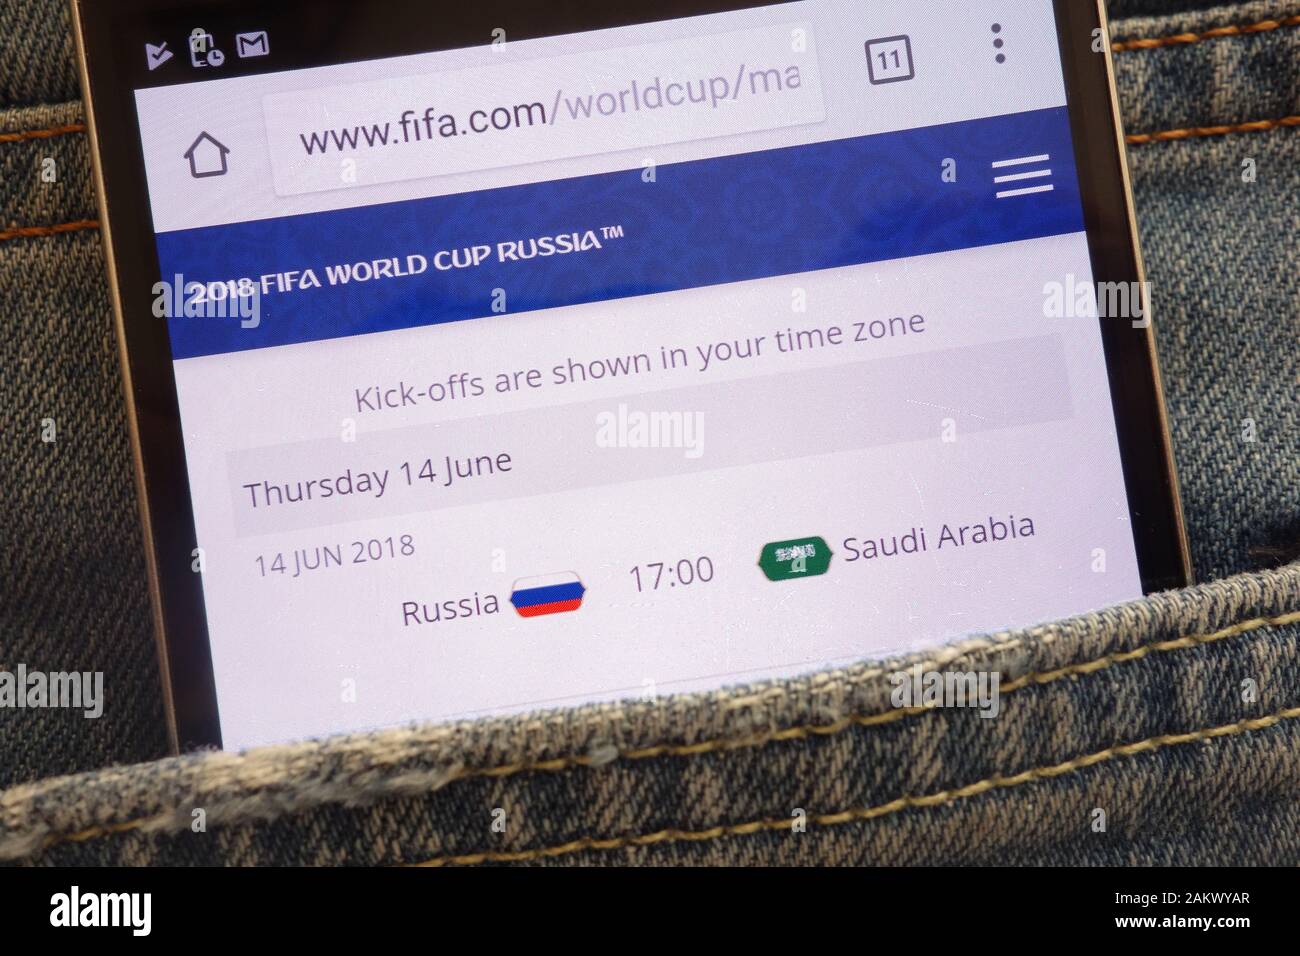 Informations about World Cup 2018 in Russia on the official Fifa website displayed on smartphone hidden in jeans pocket Stock Photo